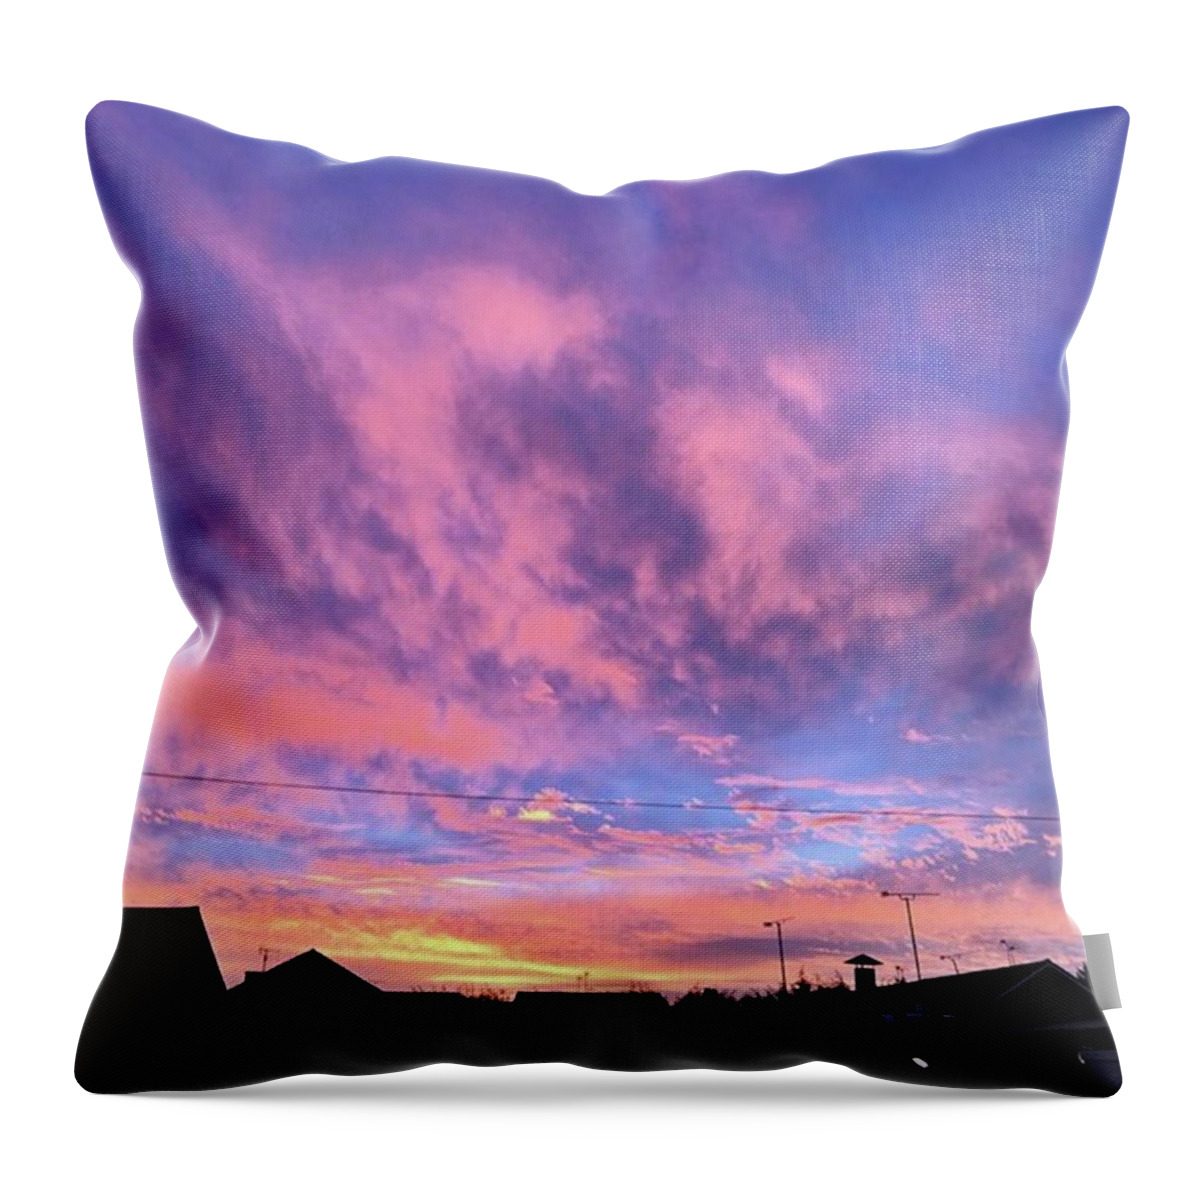 Natureonly Throw Pillow featuring the photograph Tonight's Sunset Over Tesco :)
#view by John Edwards